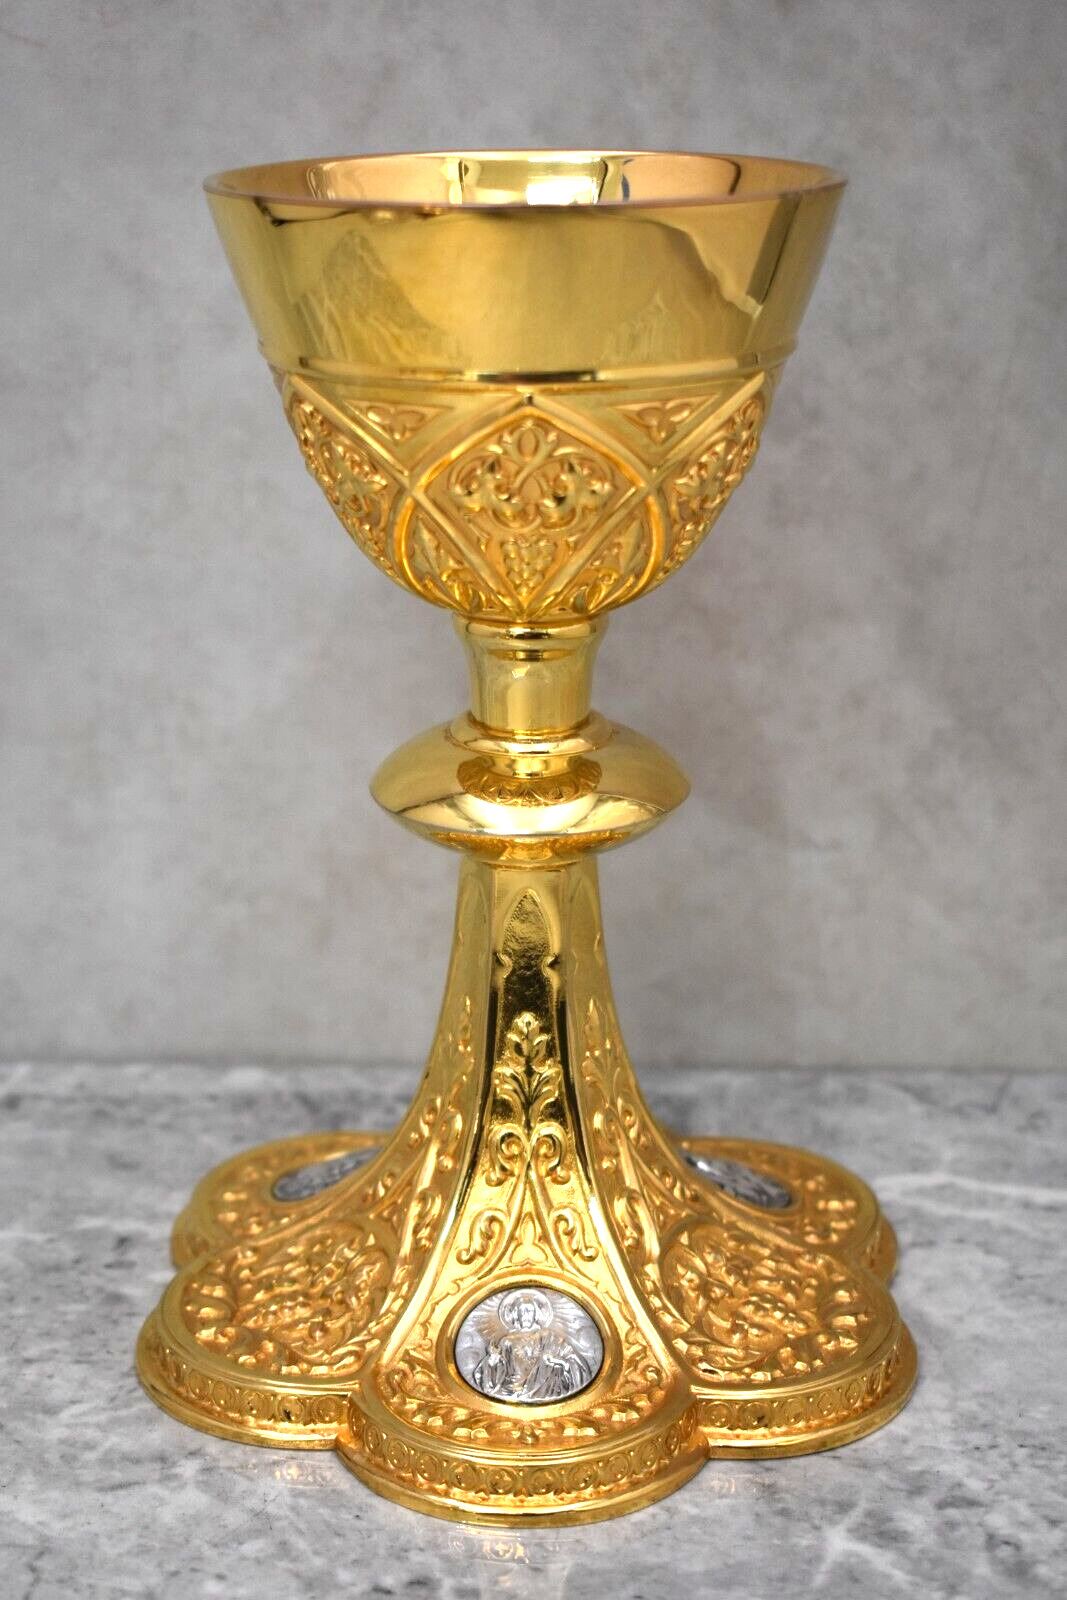 Gothic Holy Family Chalice, Made in Spain, Used But Still Very Clean (CU204)